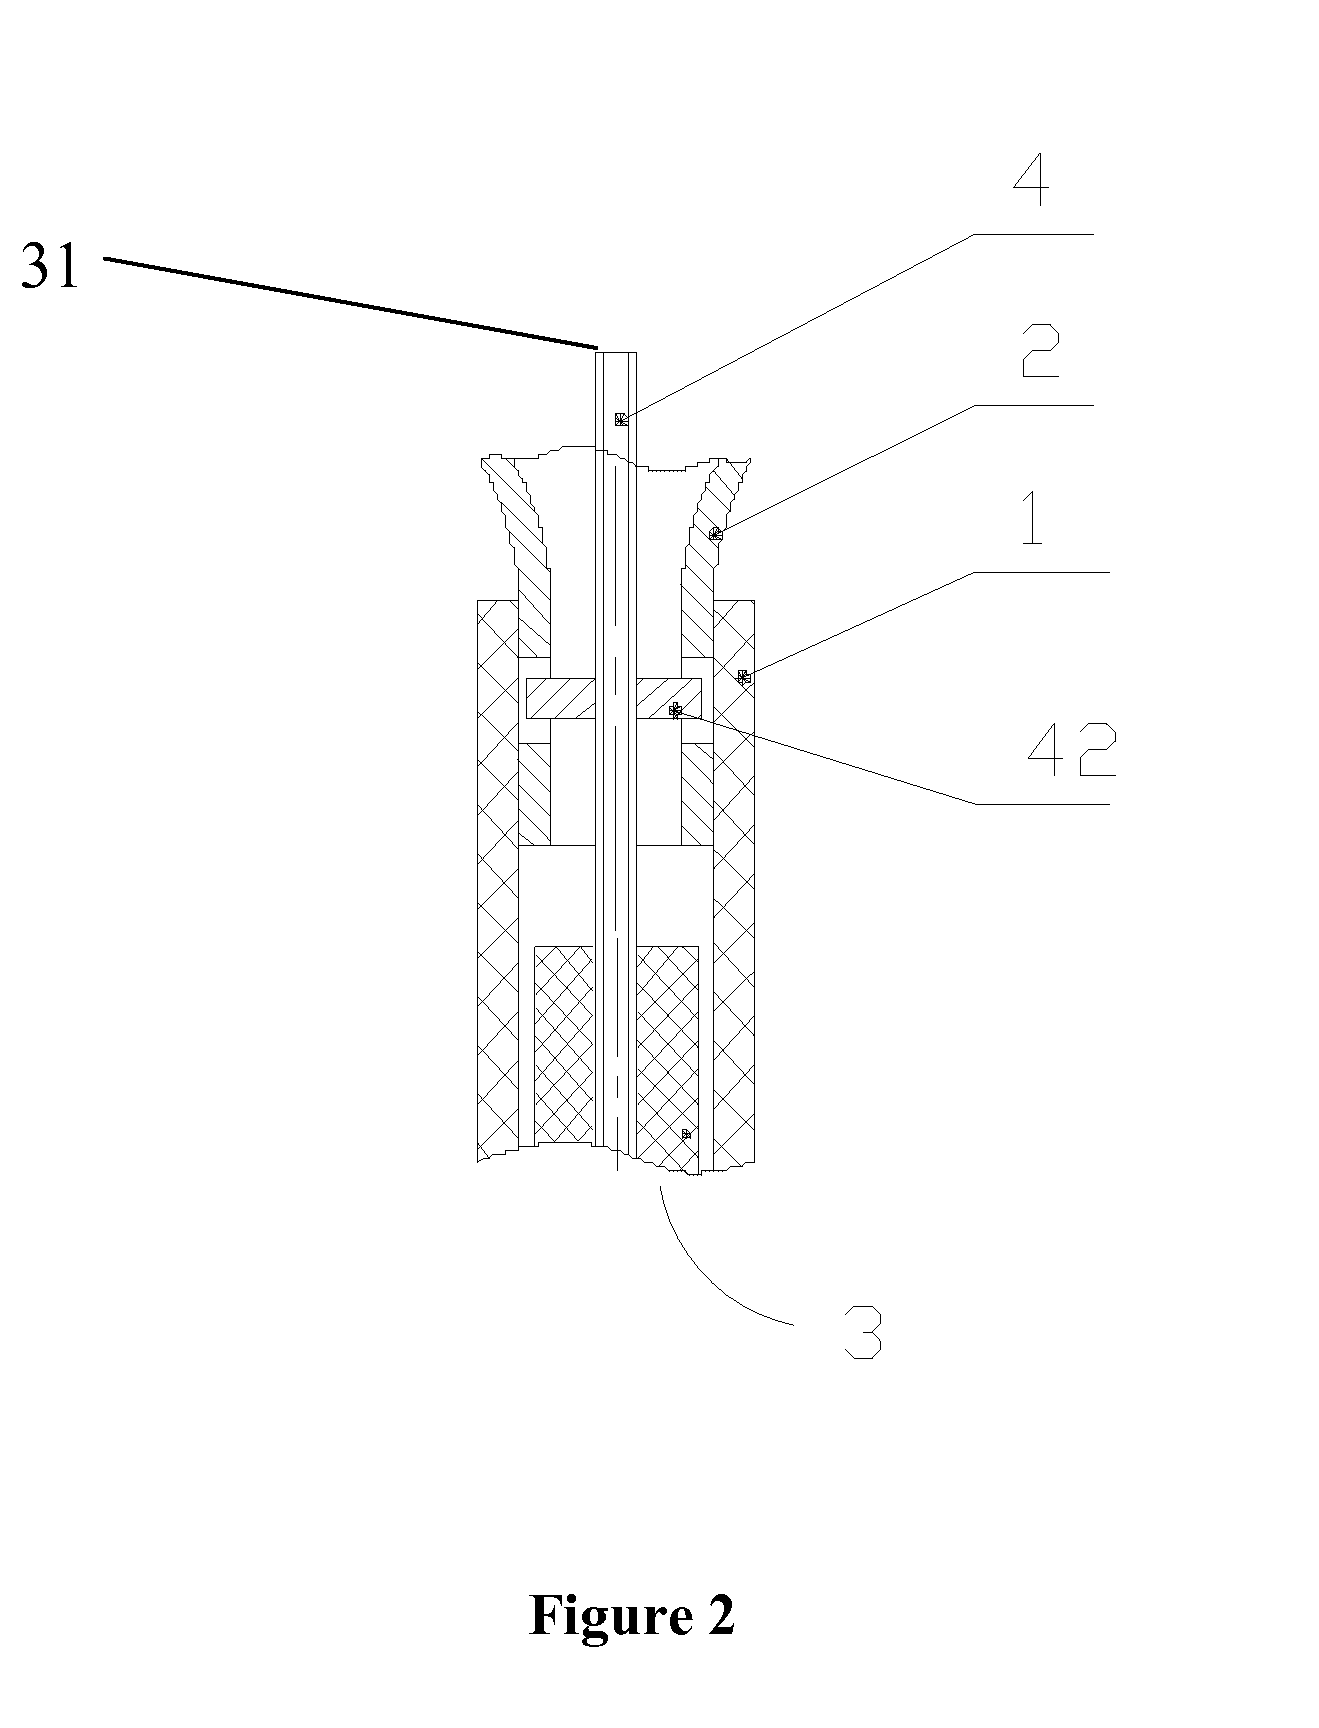 Delivery apparatus for a retractable self expanding neurovascular stent